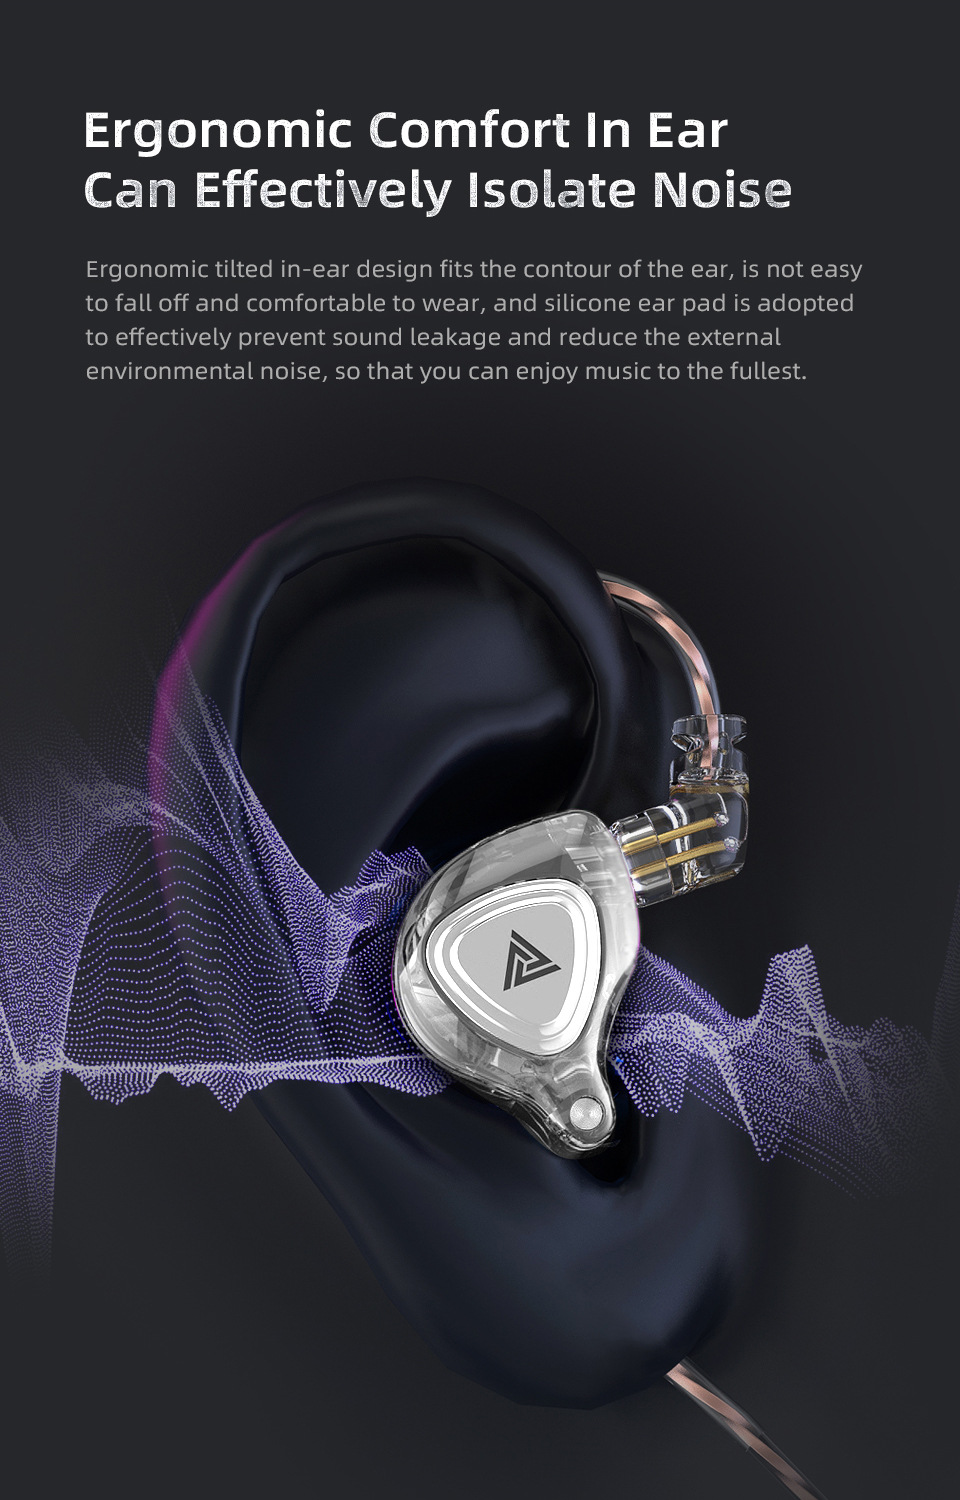 QKZ-ZX3-Dynamic-In-Ear-Earphones-Monitor-Noise-Cancelling-Sport-Music-Headphones-with-Detachable-Cab-1931414-7